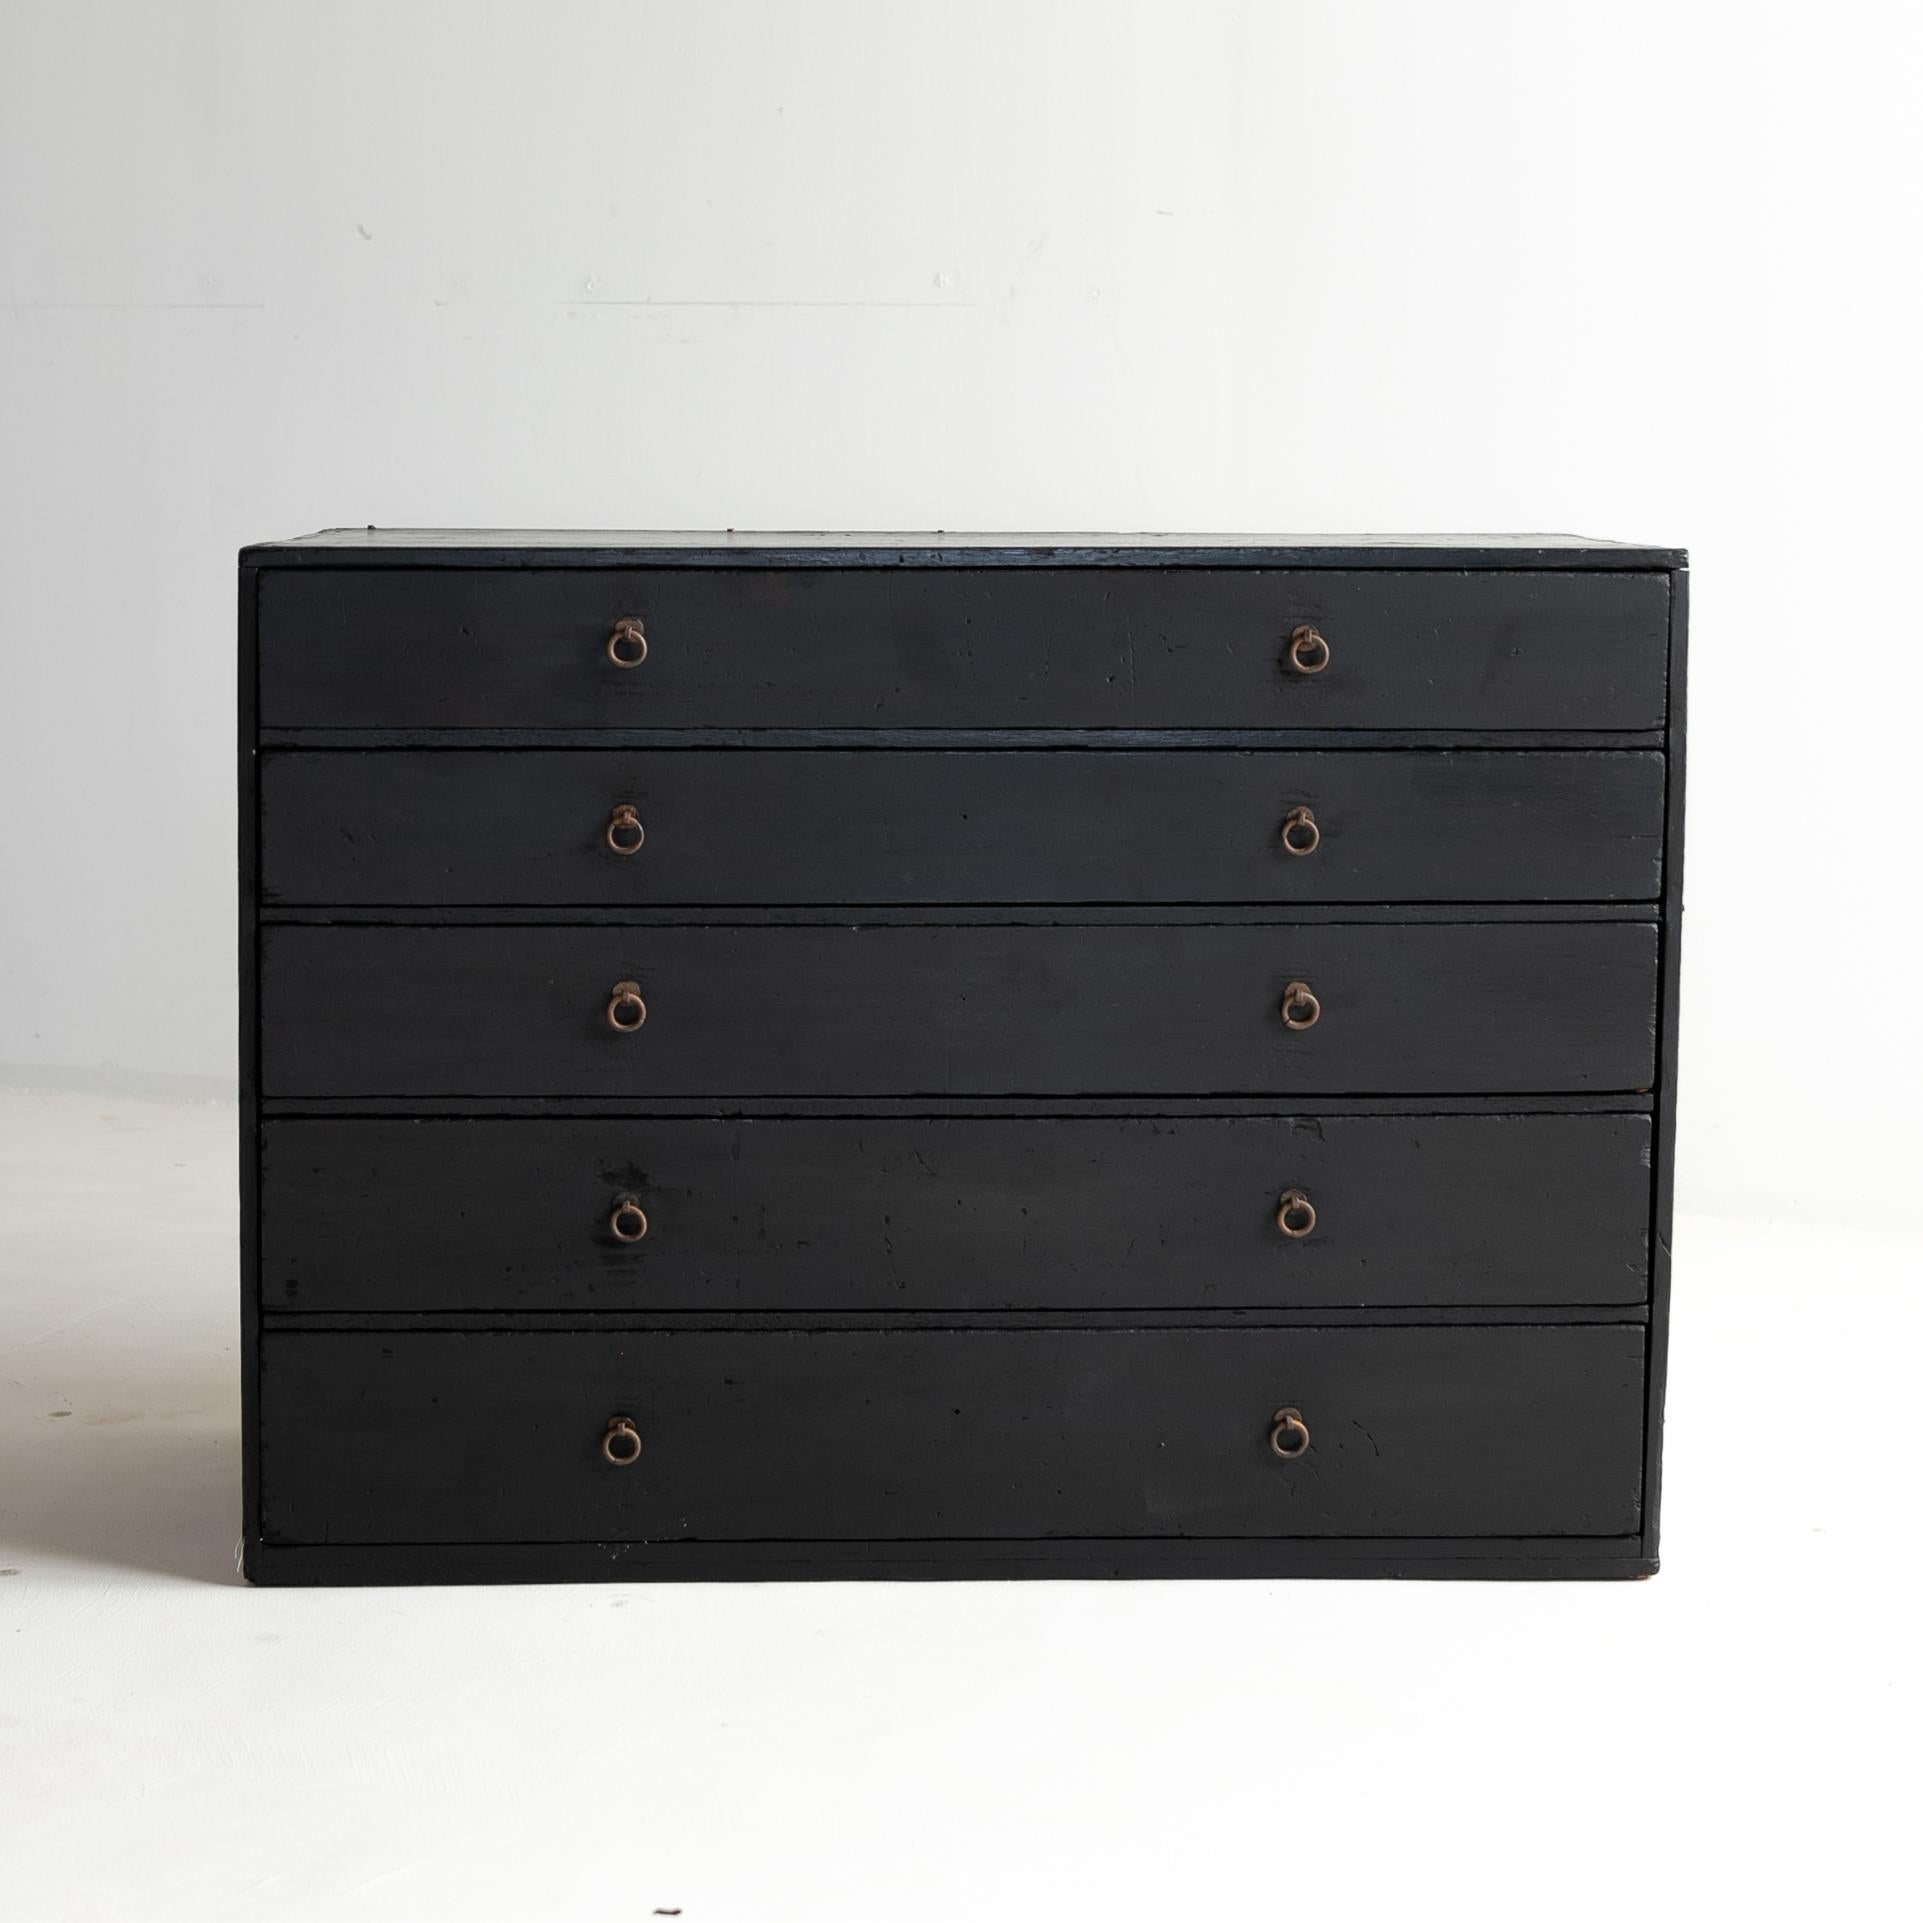 Very old Japanese black drawer.
It is from the Meiji period (1860s-1900s).
It is made mainly of cedar wood.

These drawers are beautifully finished in black lacquer.
The design is simple and lean.
It is the ultimate in simplicity.

The large round